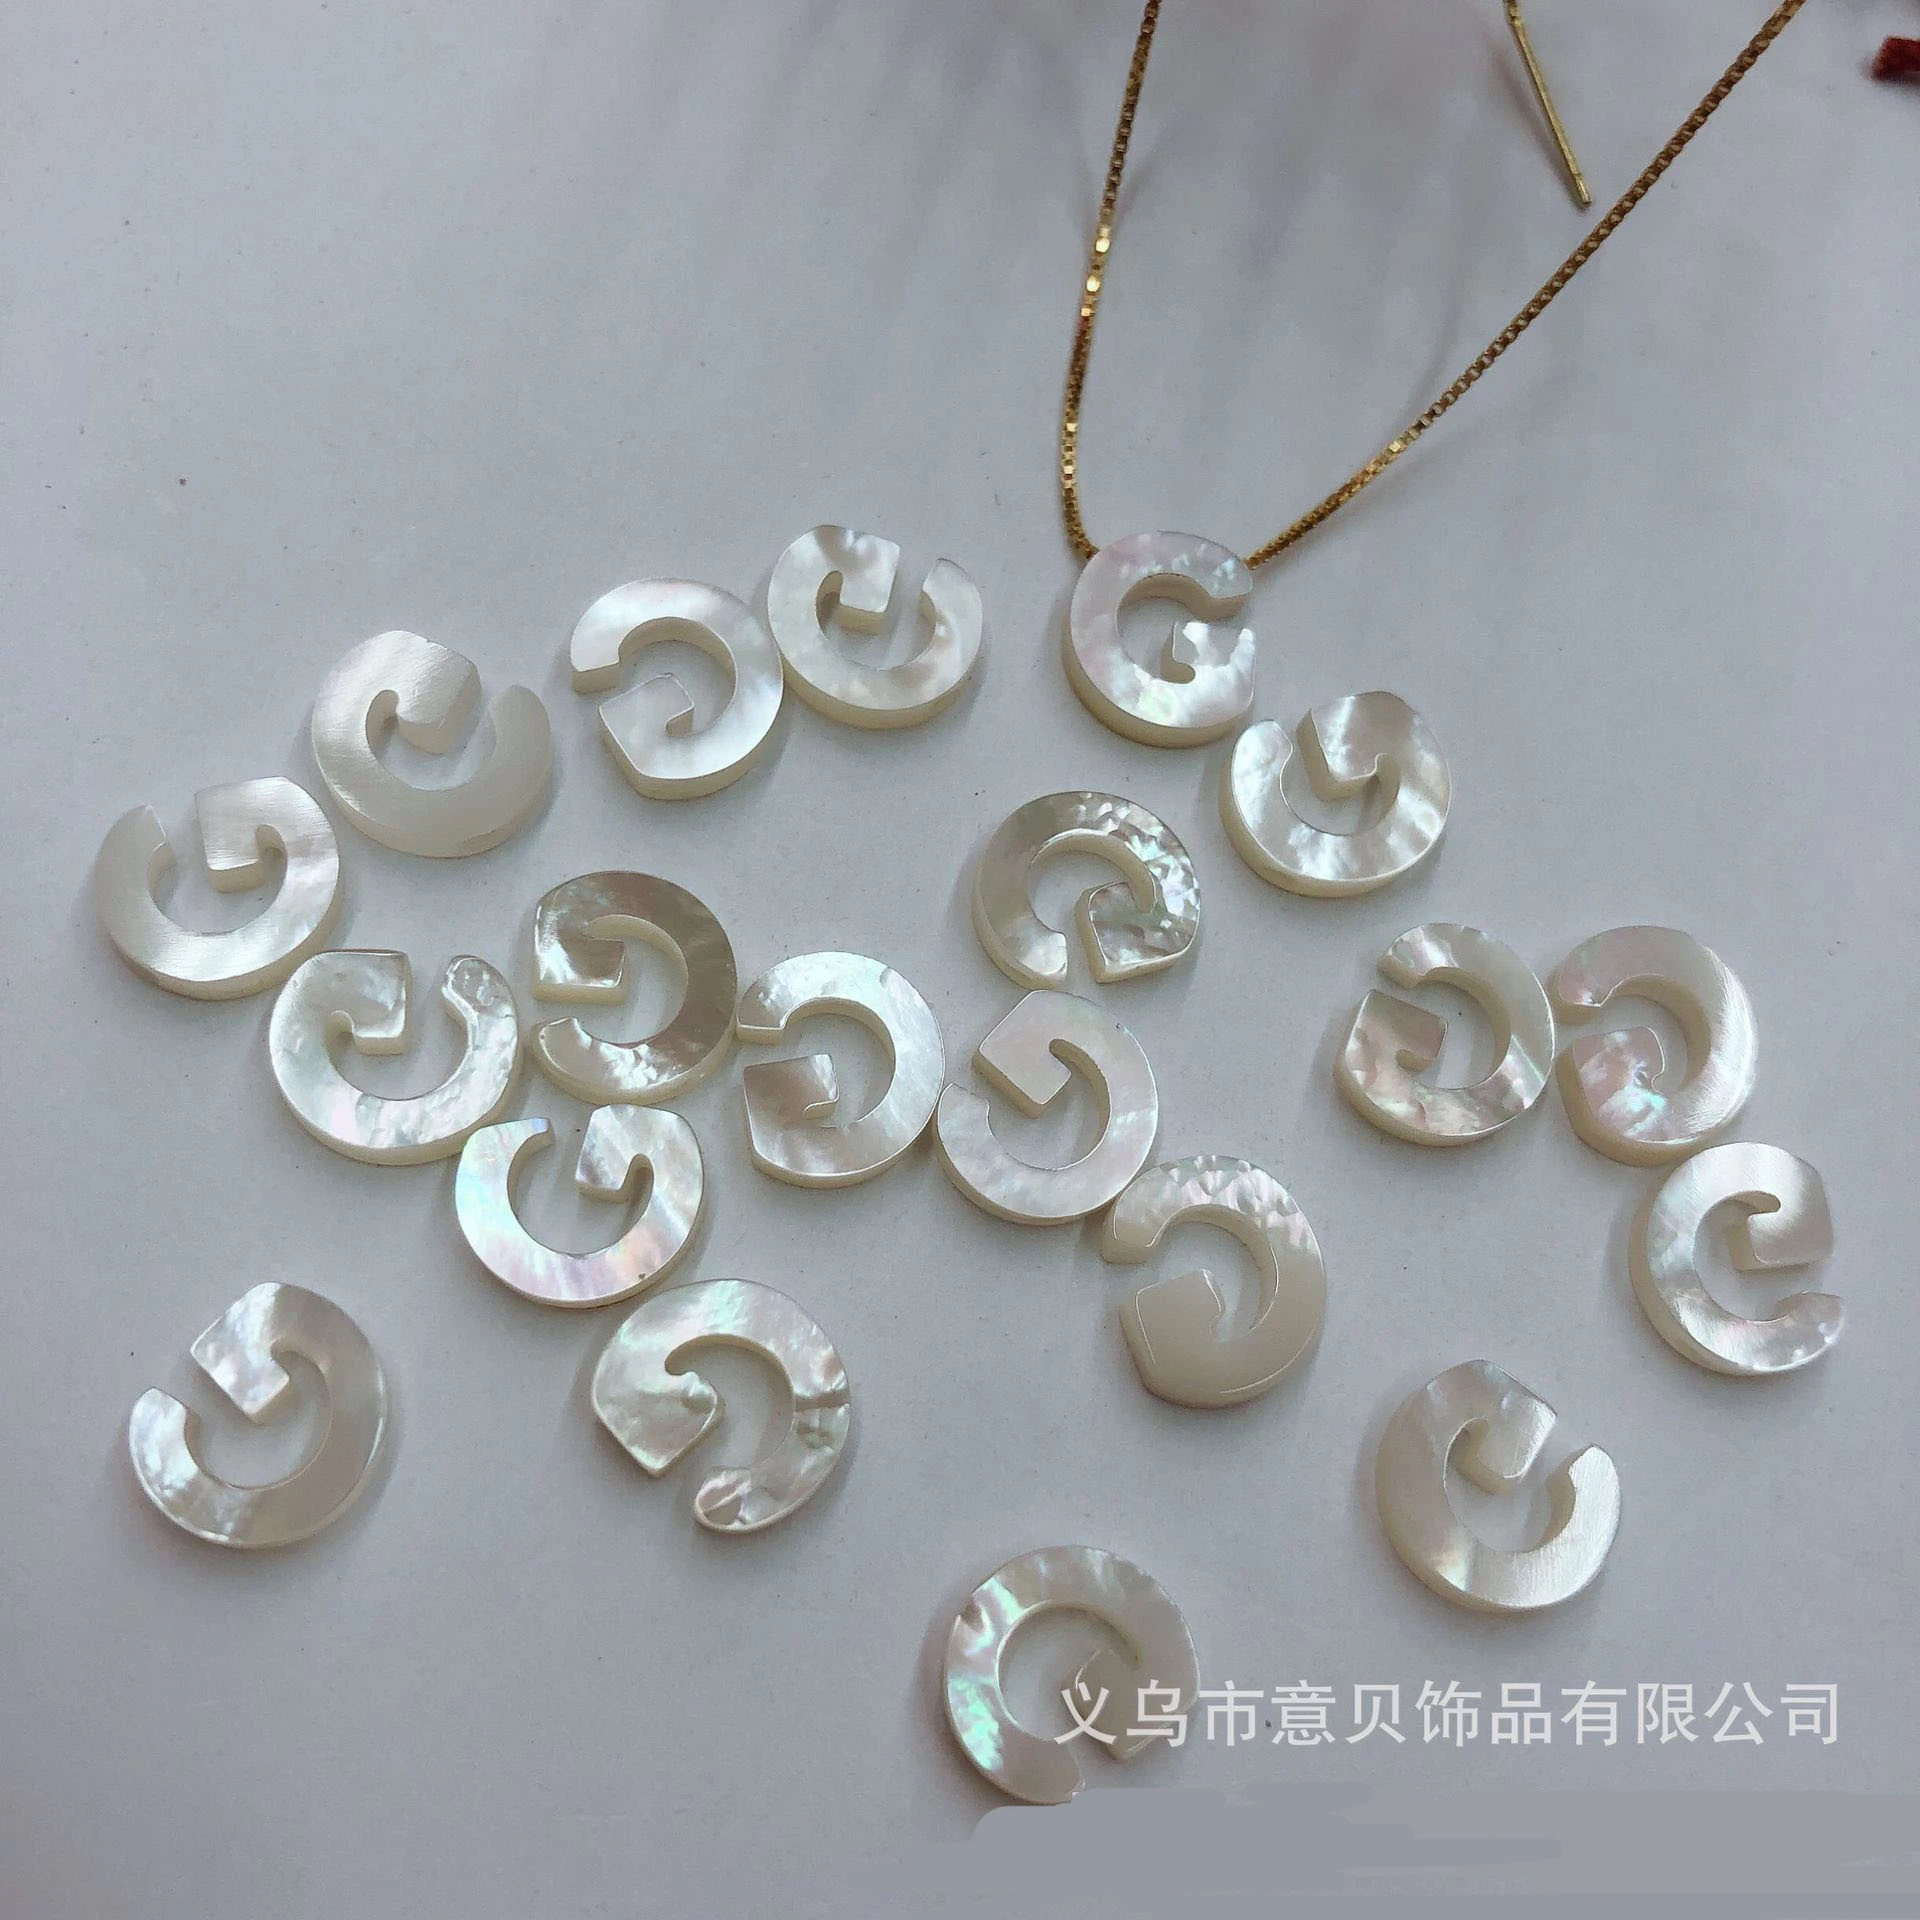 Hollow blank butterfly shell 26 English letters shell piece diy handmade loose beads pendant accessories